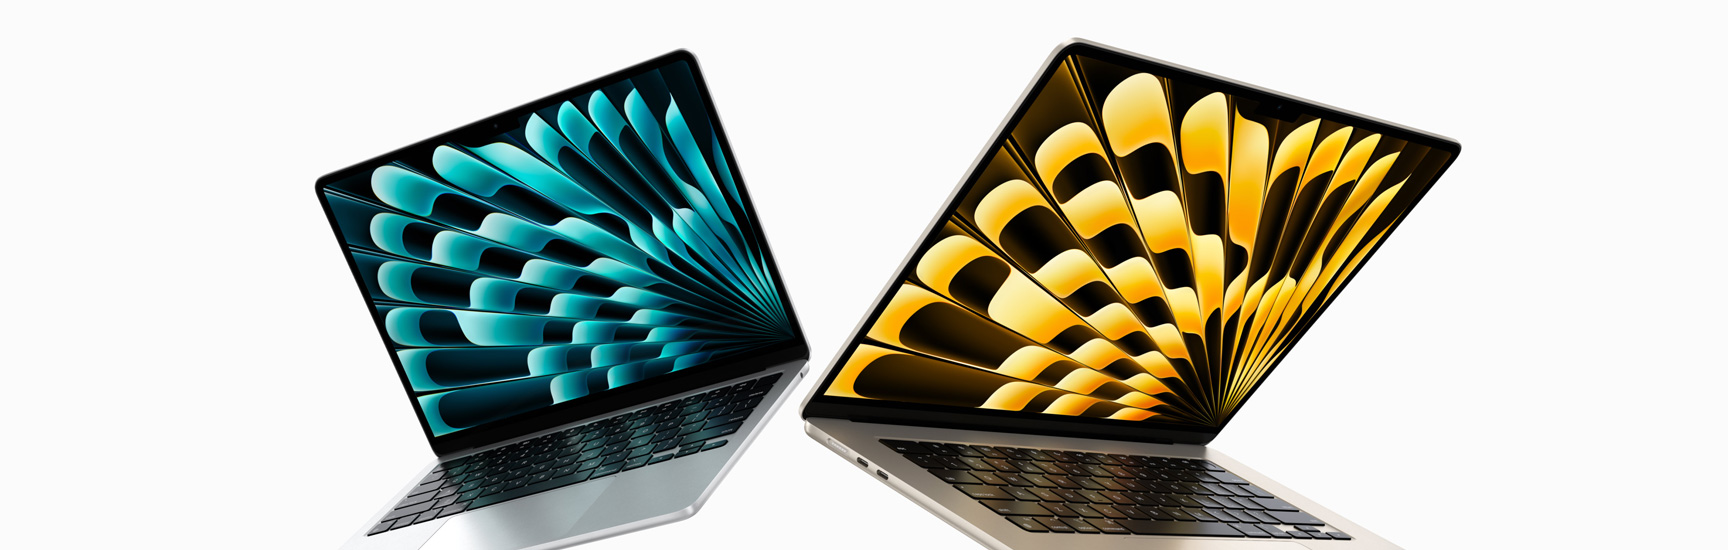 MacBook Air - 15-inch with 13- and Apple M2